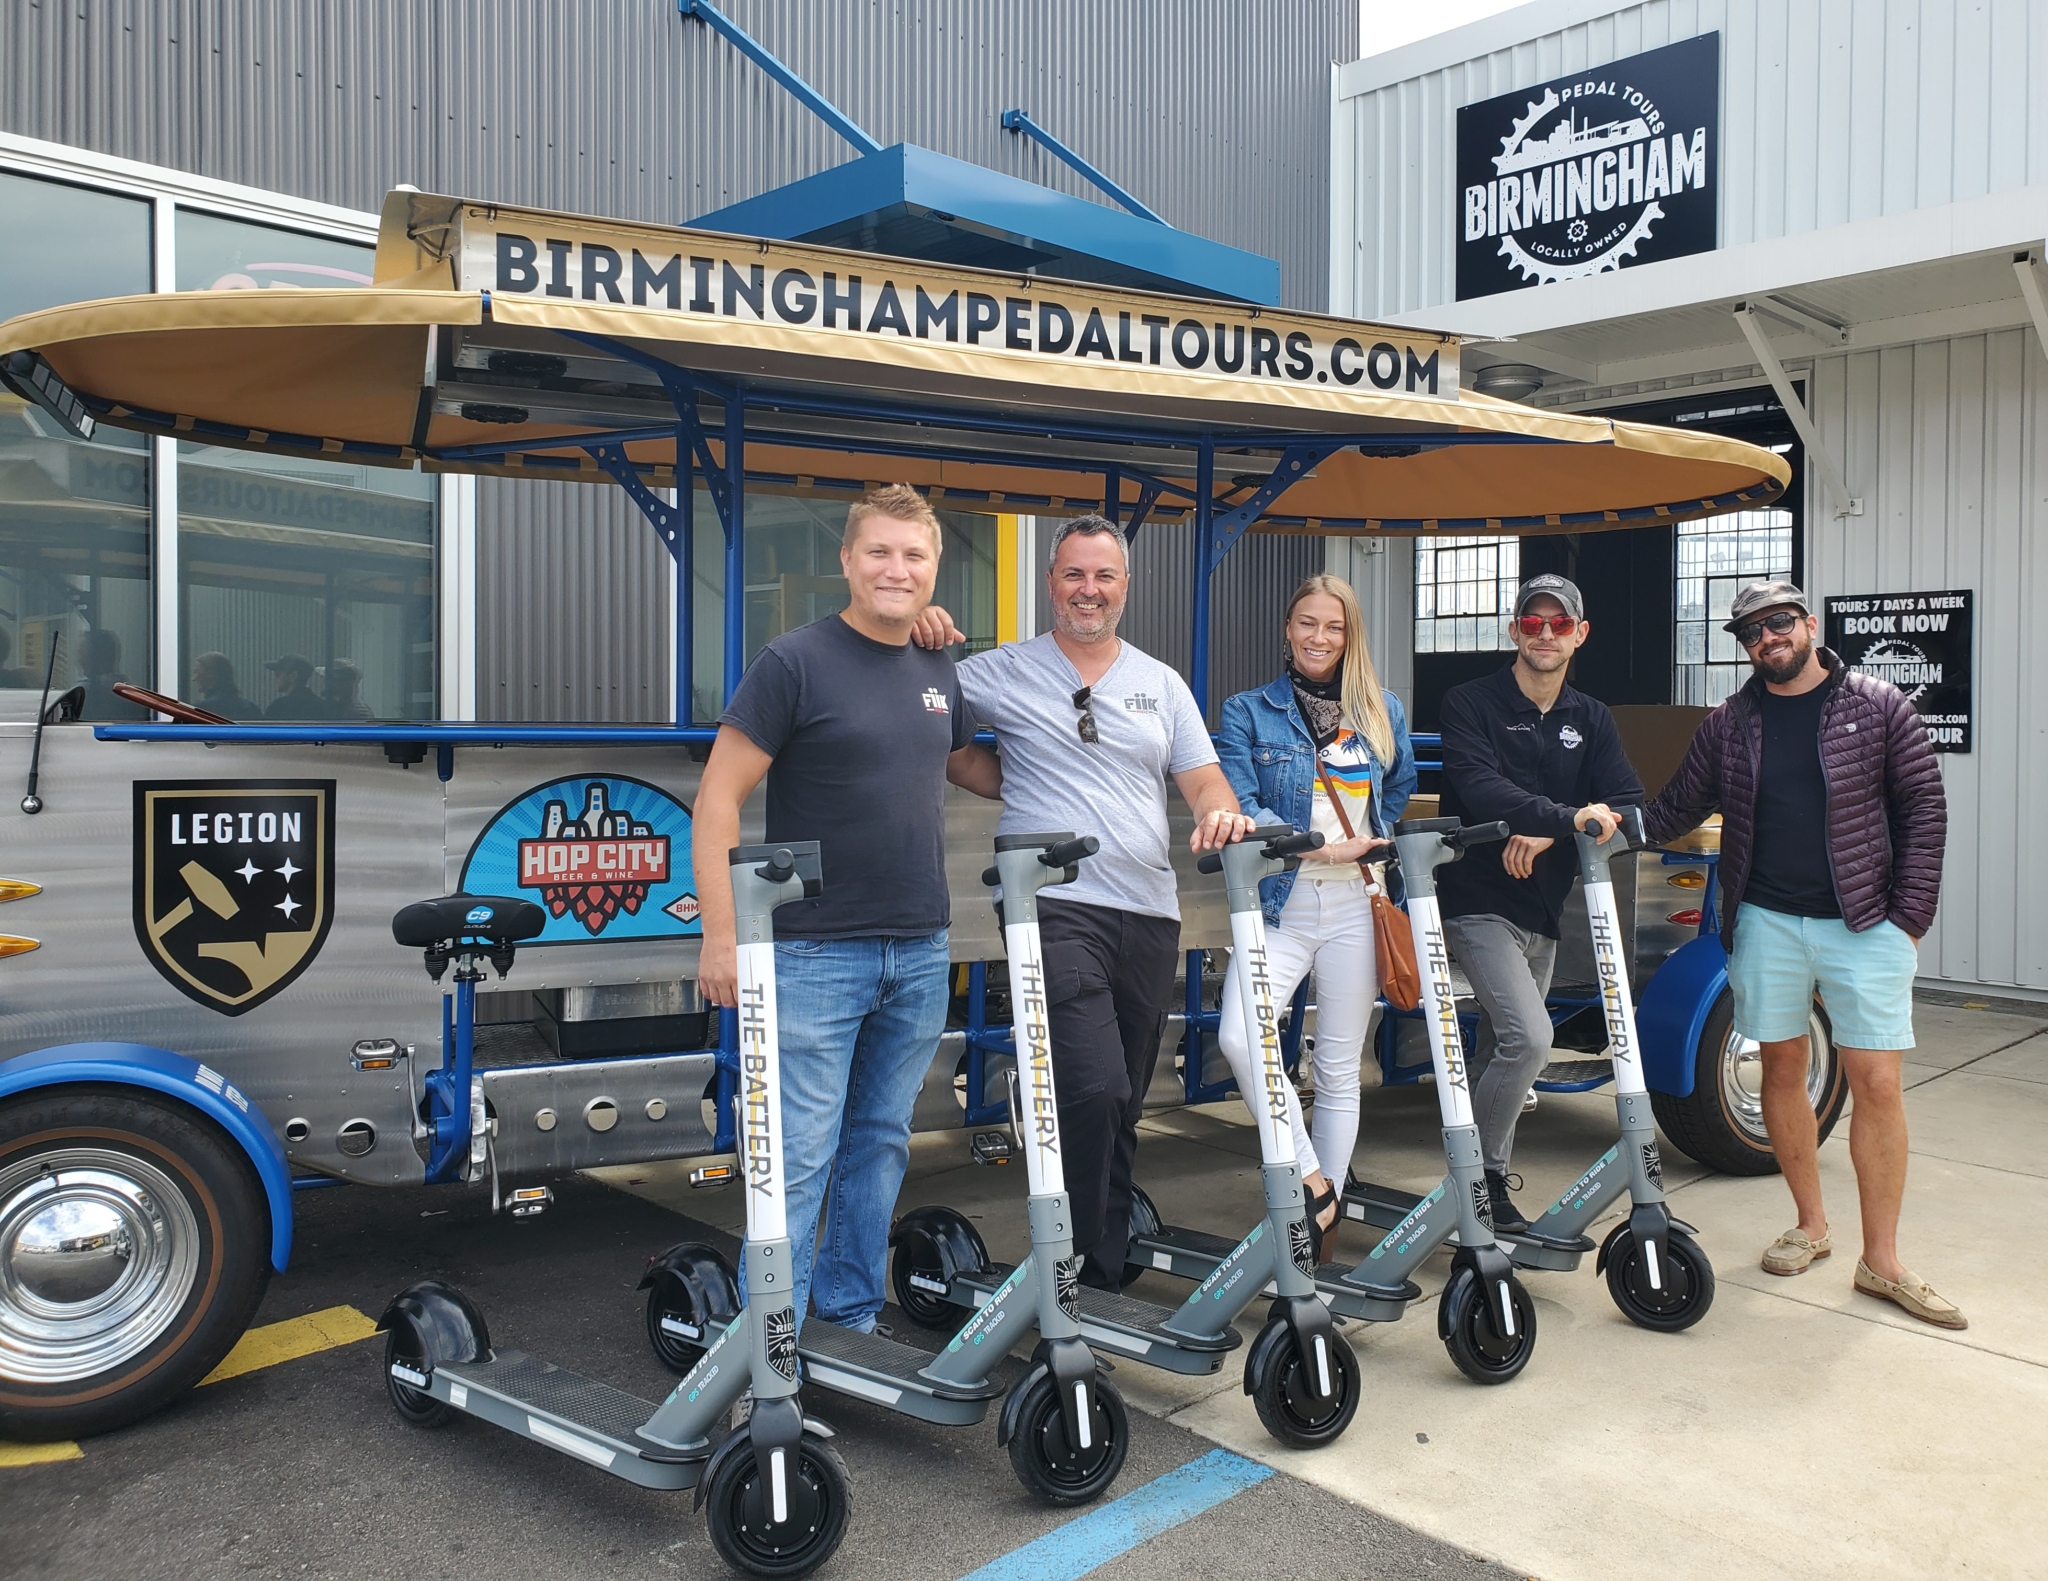 Owners of Birmingham Pedal Tours and Ride Fiik stand together around the scooters for a photo